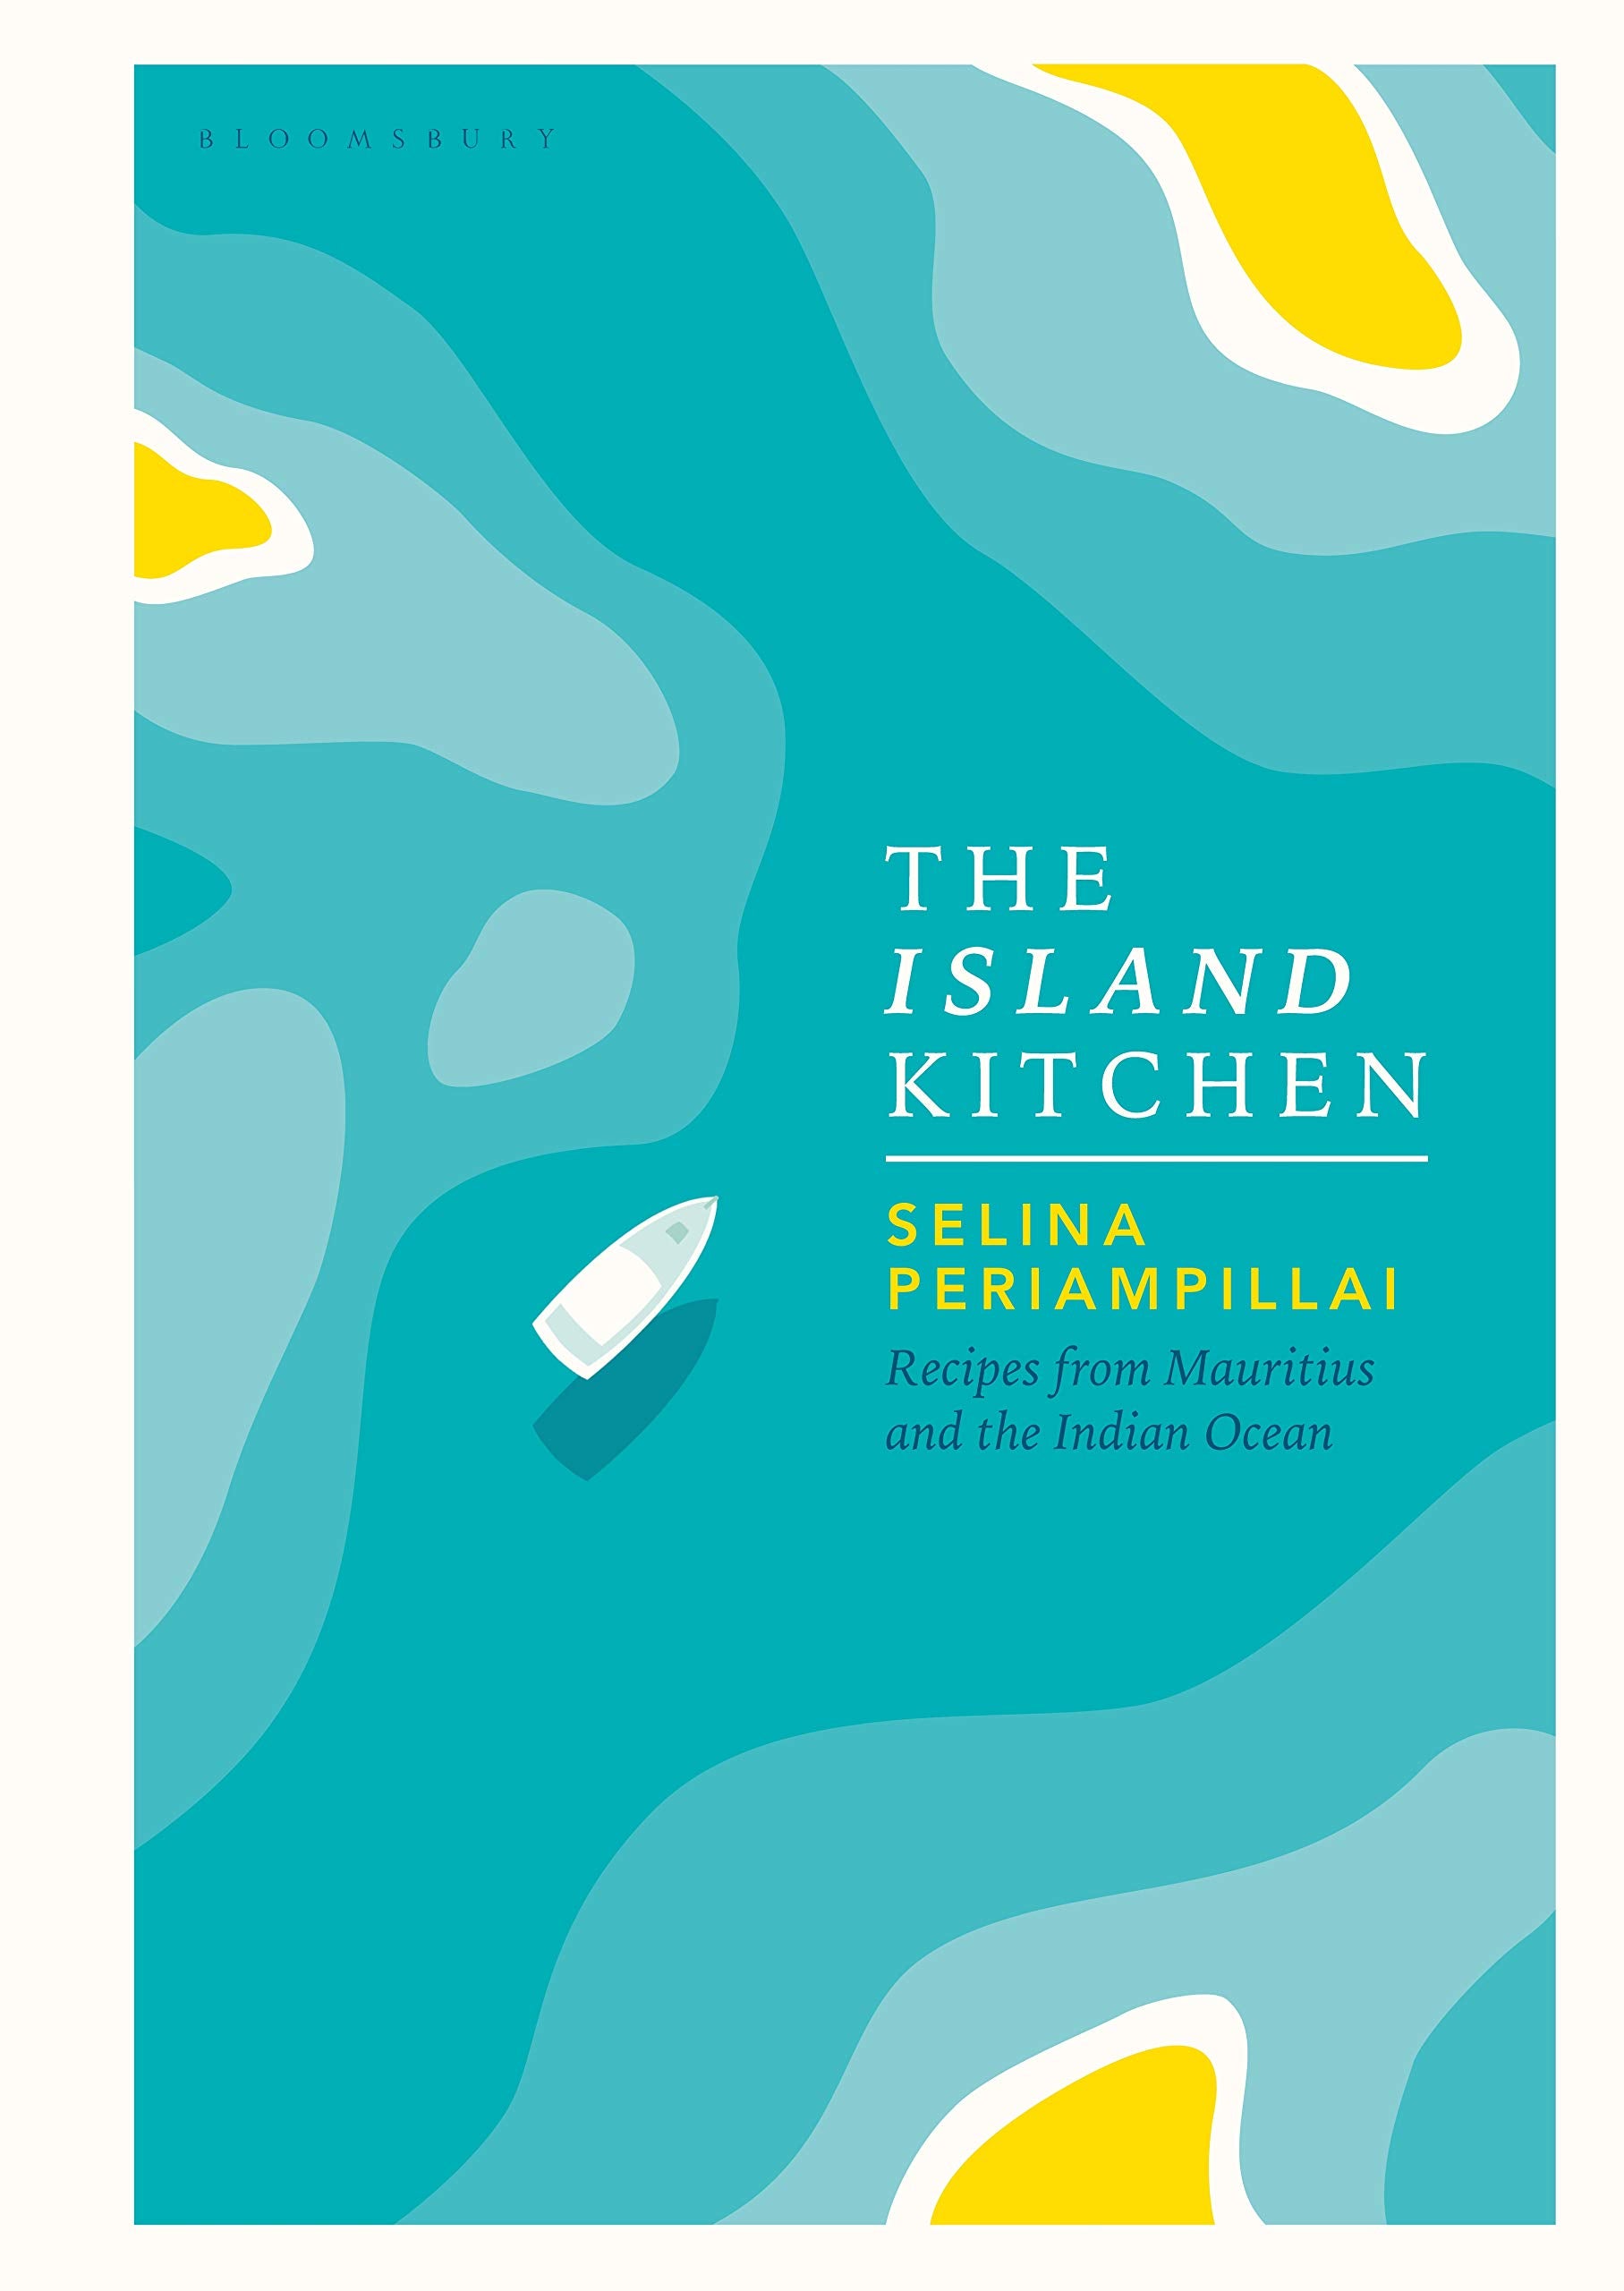 The Island Kitchen: Recipes from Mauritius and the Indian Ocean (Selina Periampillai)